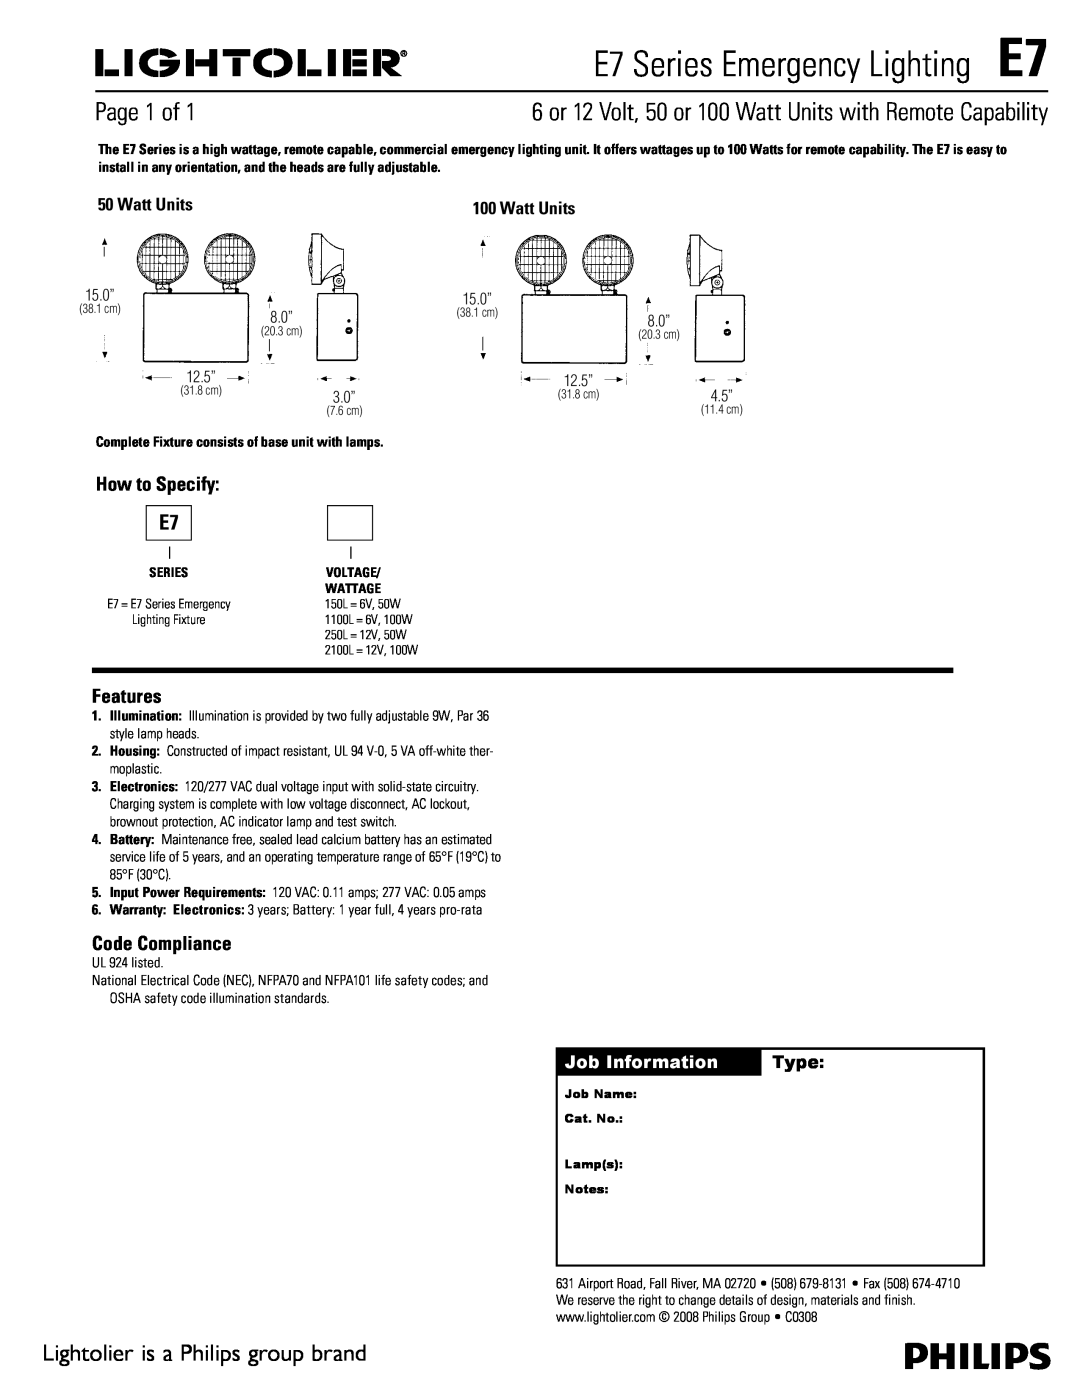 Lightolier warranty E7 Series Emergency LightingE7, Page 1 of, Lightolier is a Philips group brand, How to Specify 